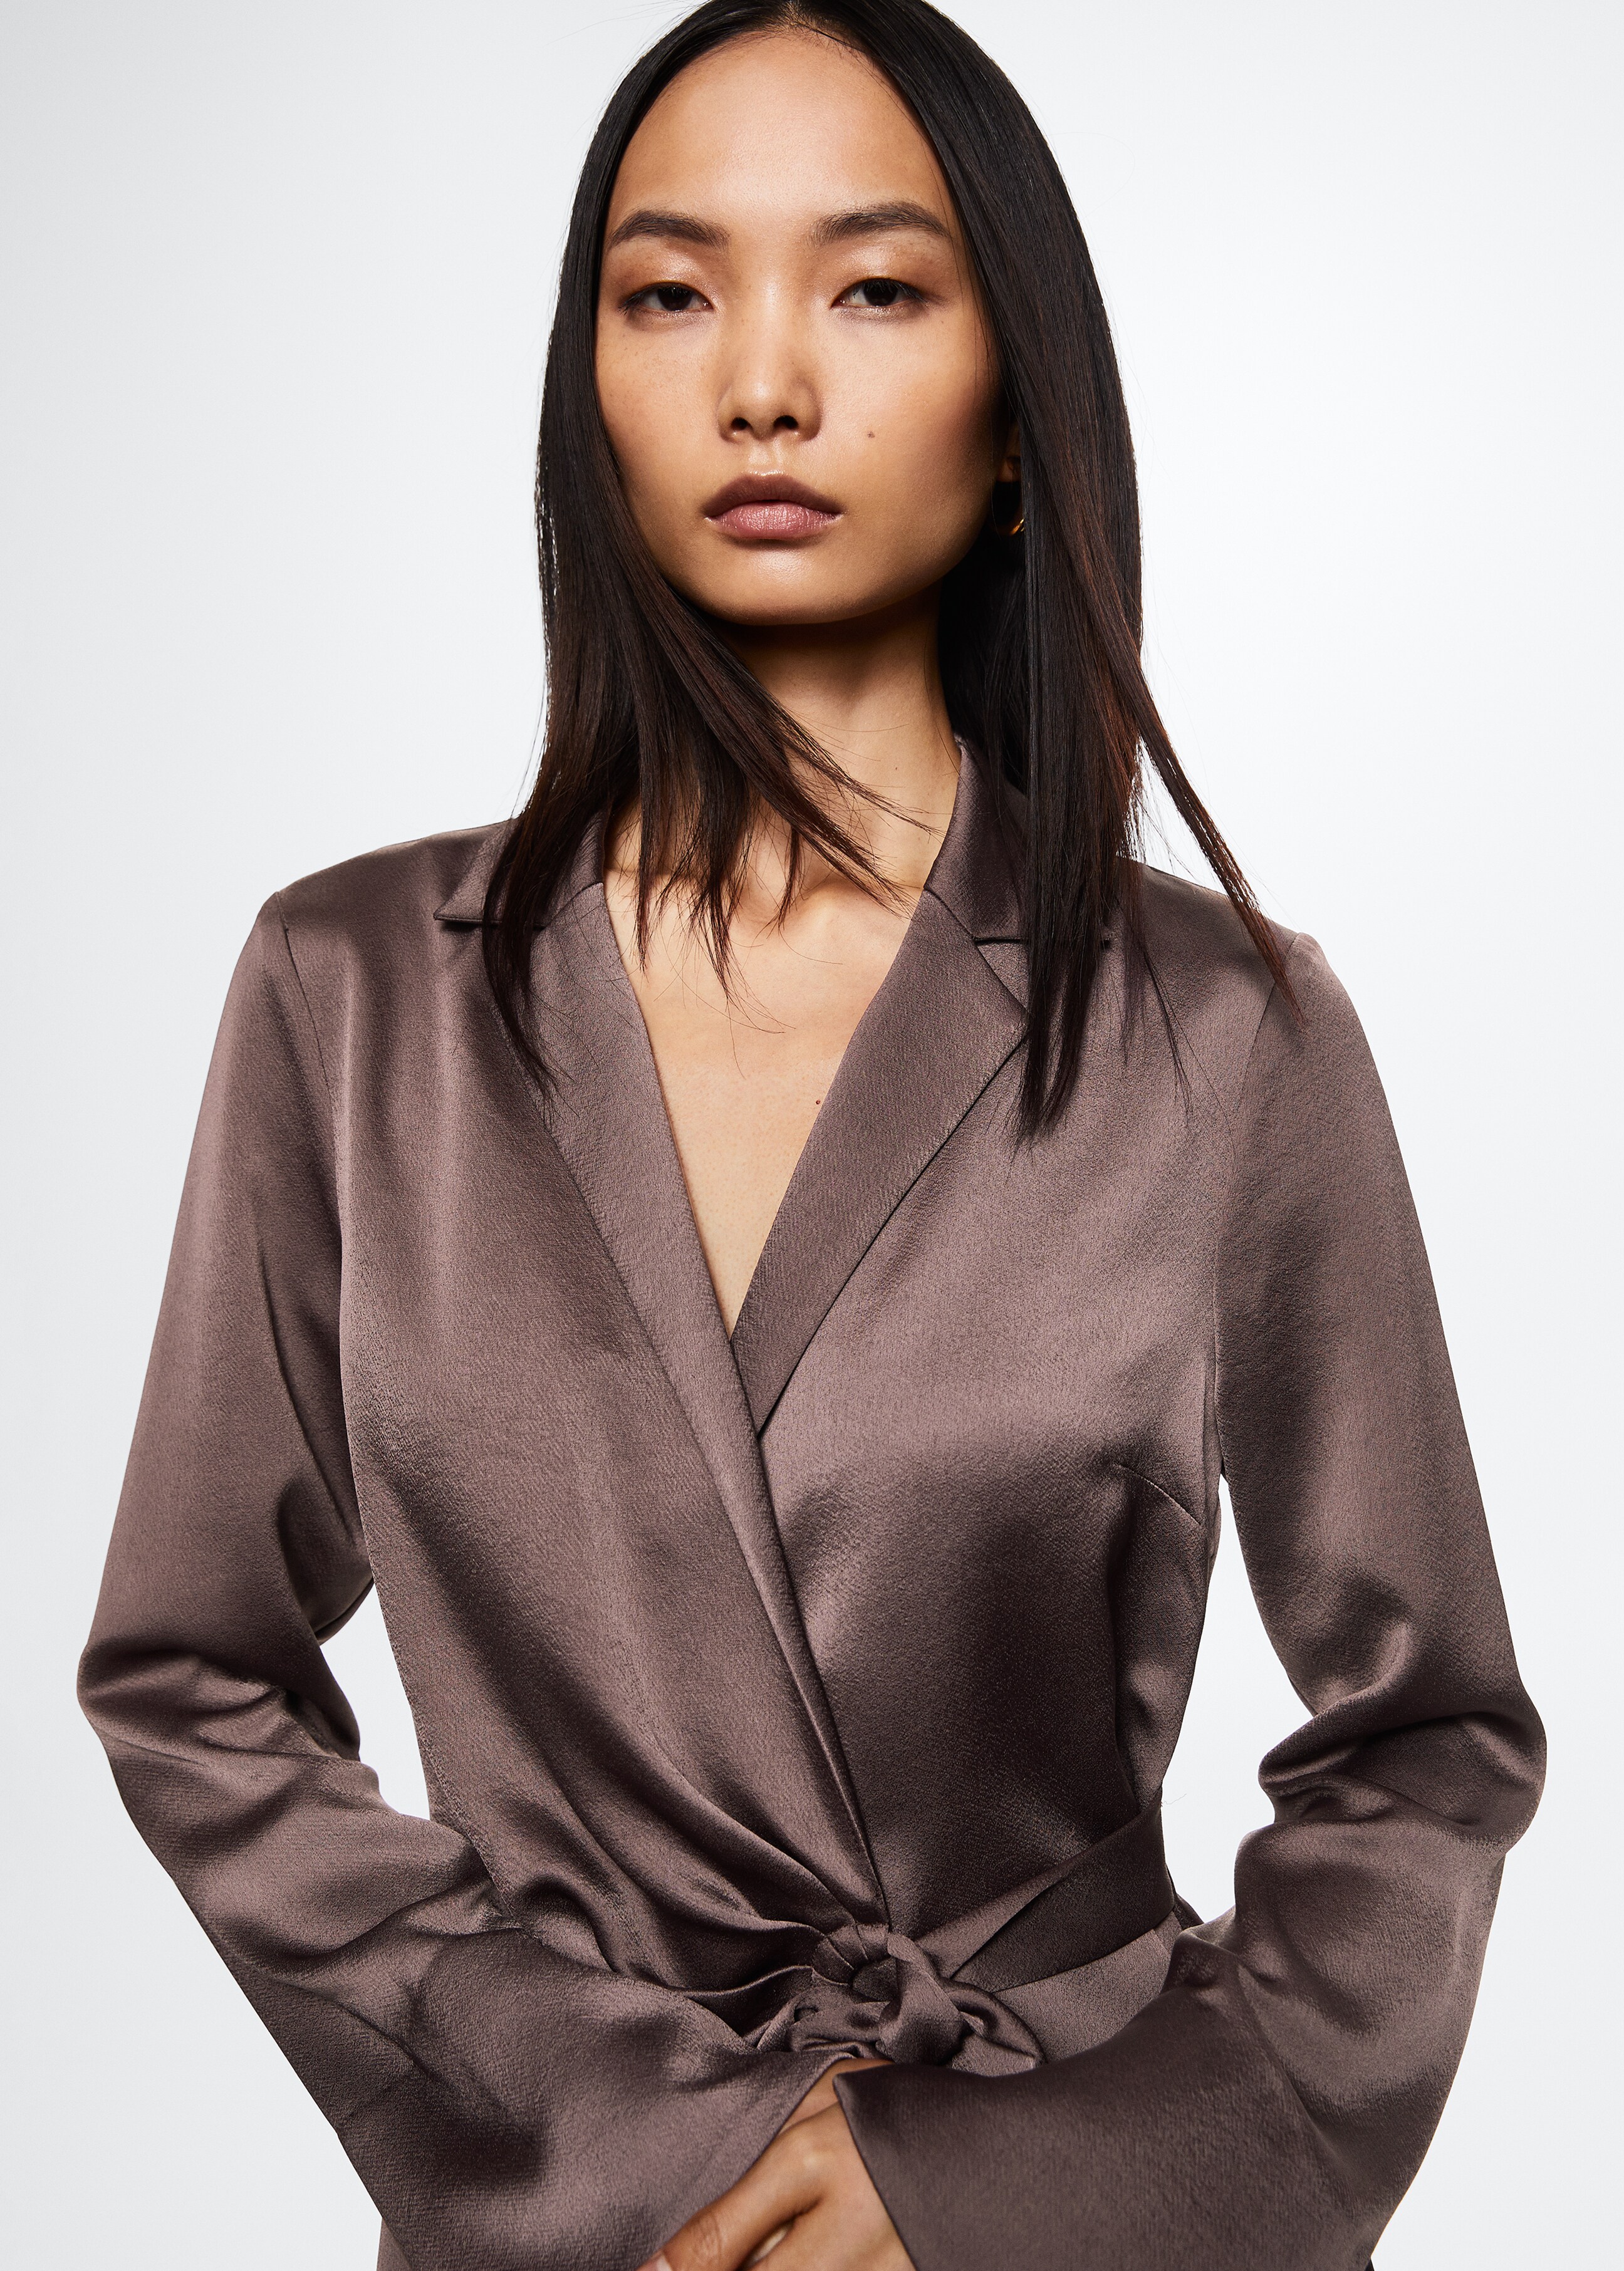 Satin shirt dress - Details of the article 6